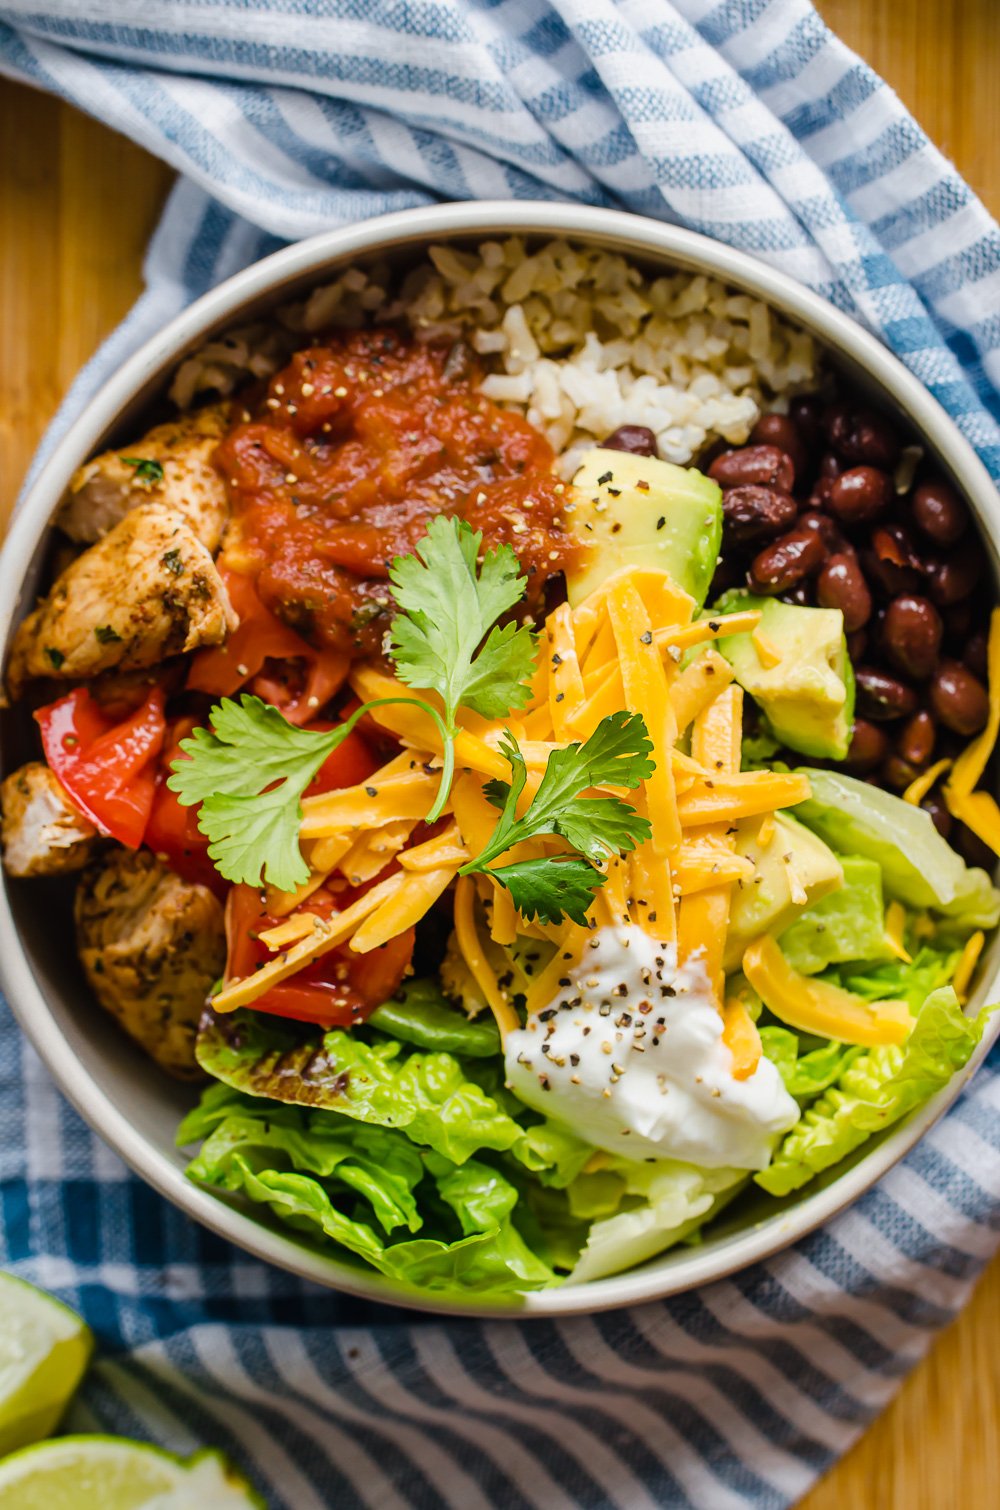 Chicken burrito bowl with avocado chunks, shredded cheese, salsa, and fresh cilantro on top.